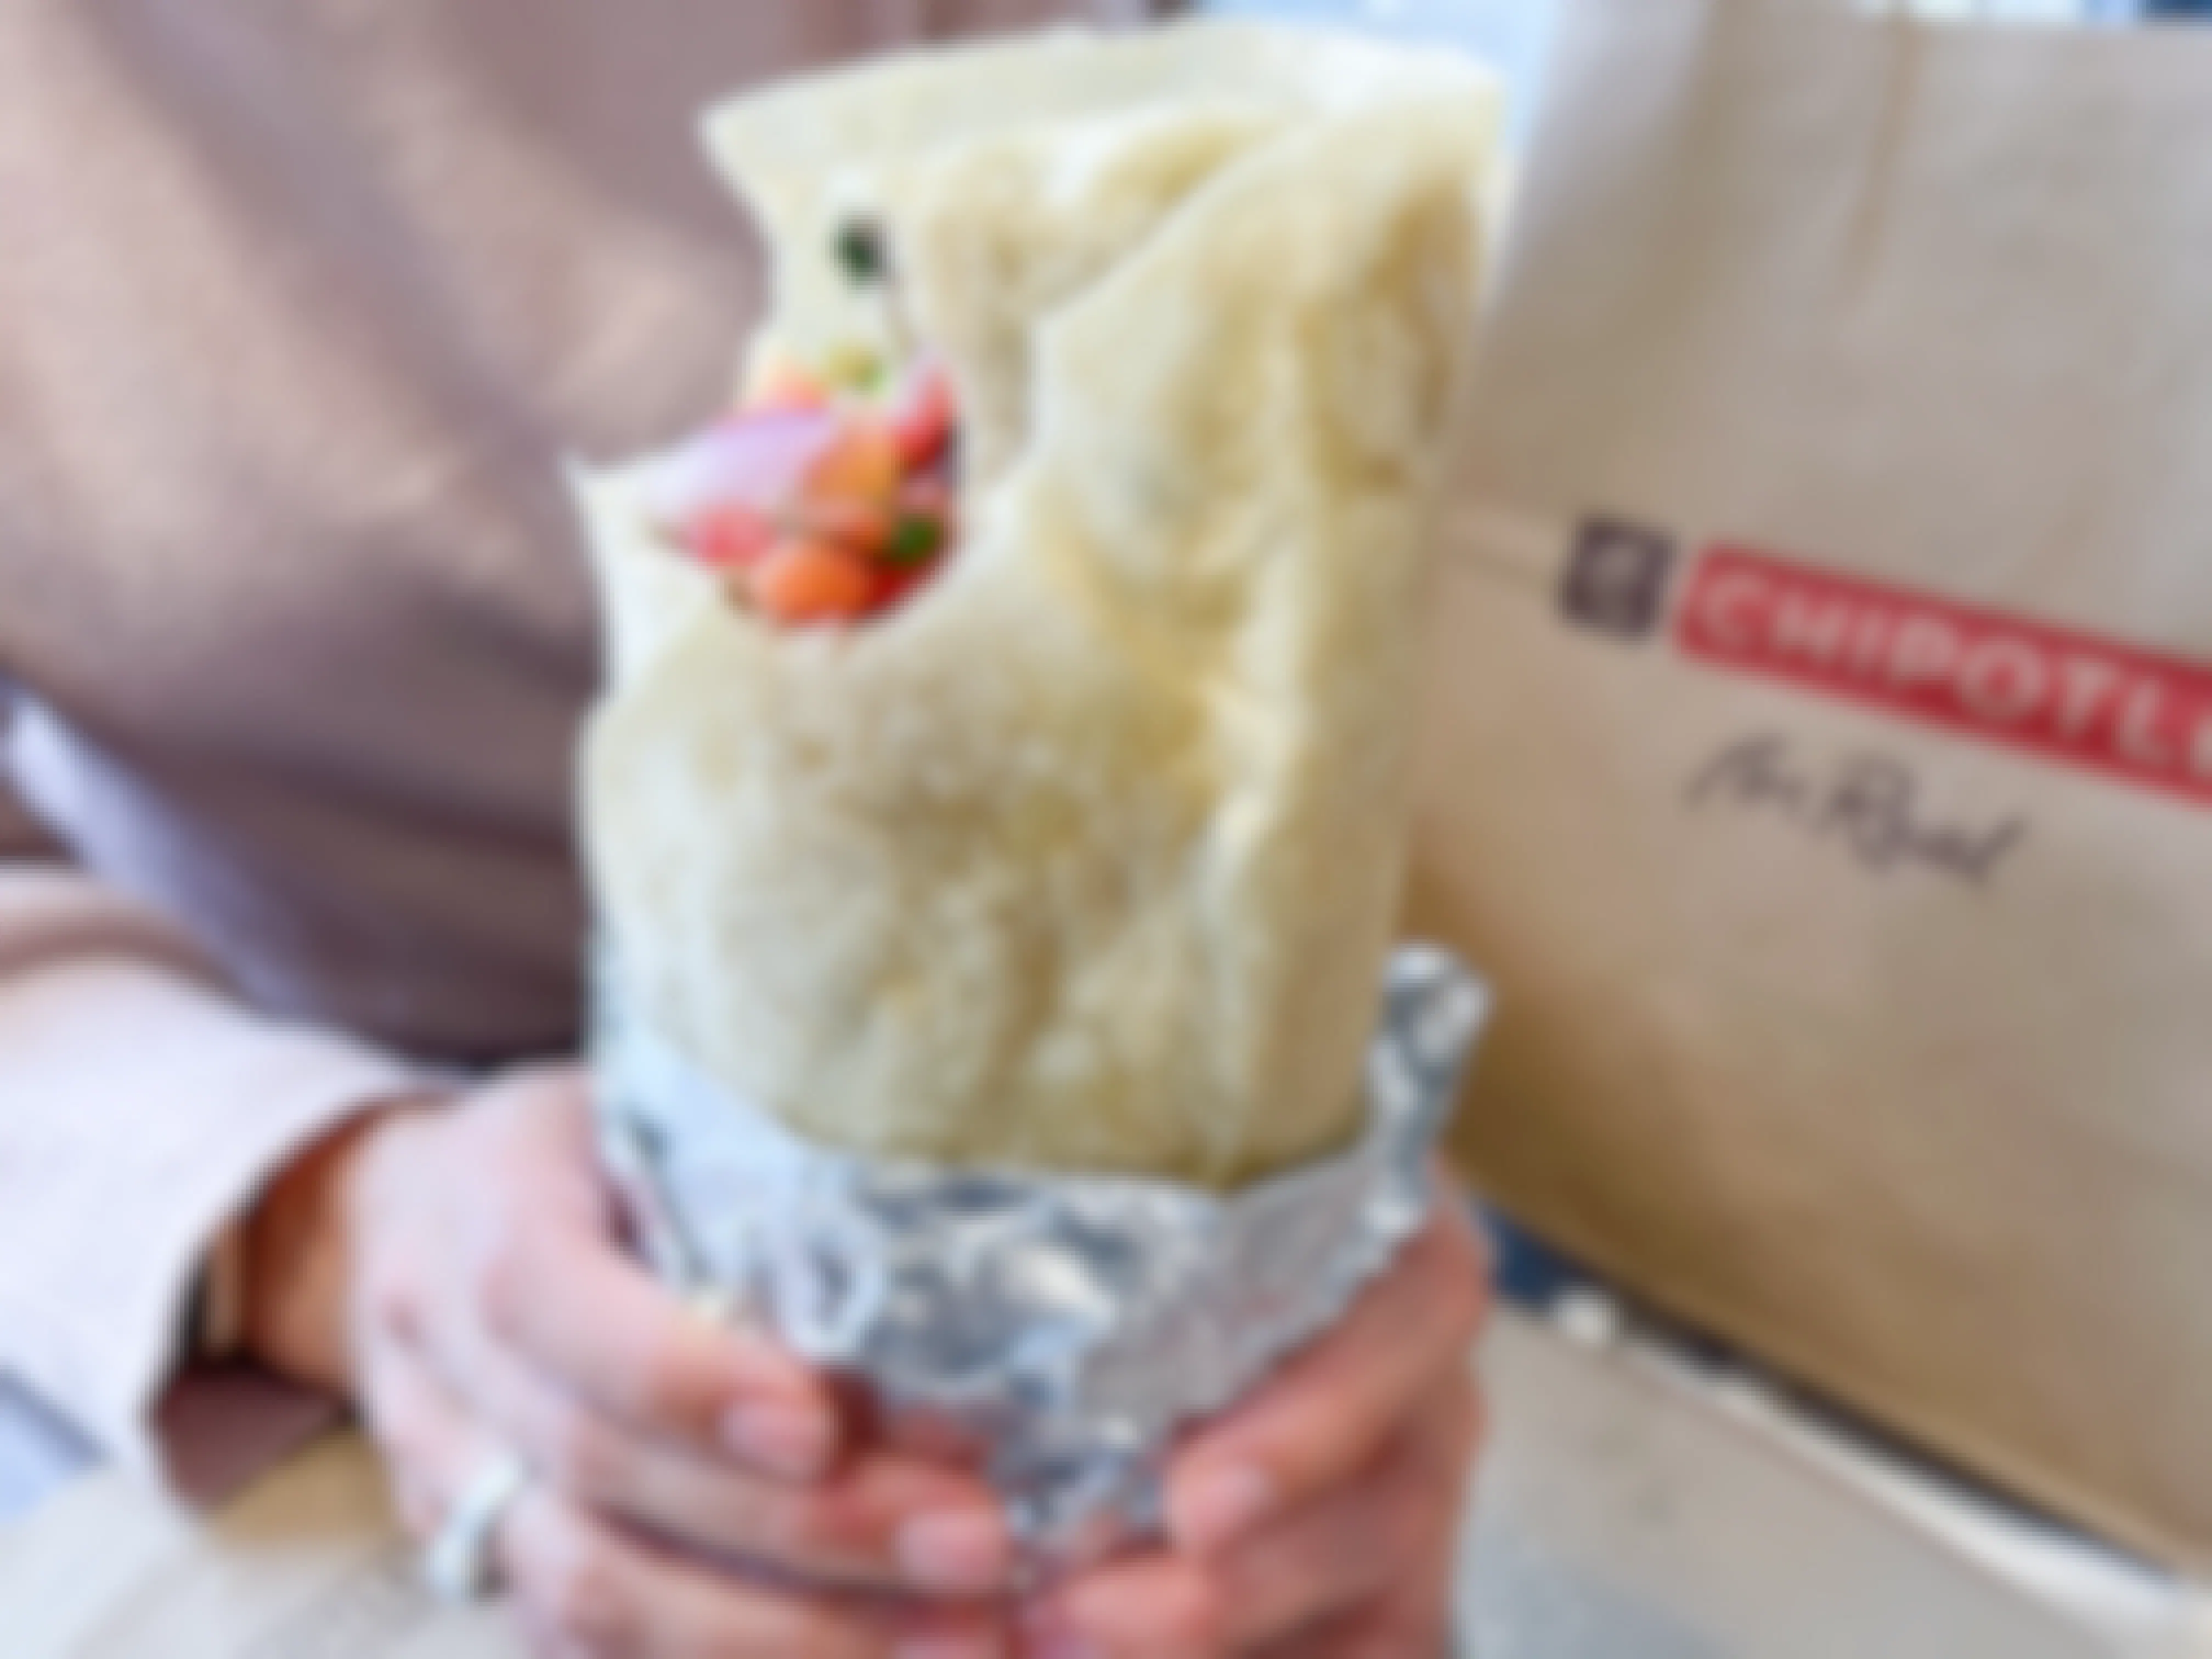 A person holding a double wrapped burrito near a Chipotle bag.